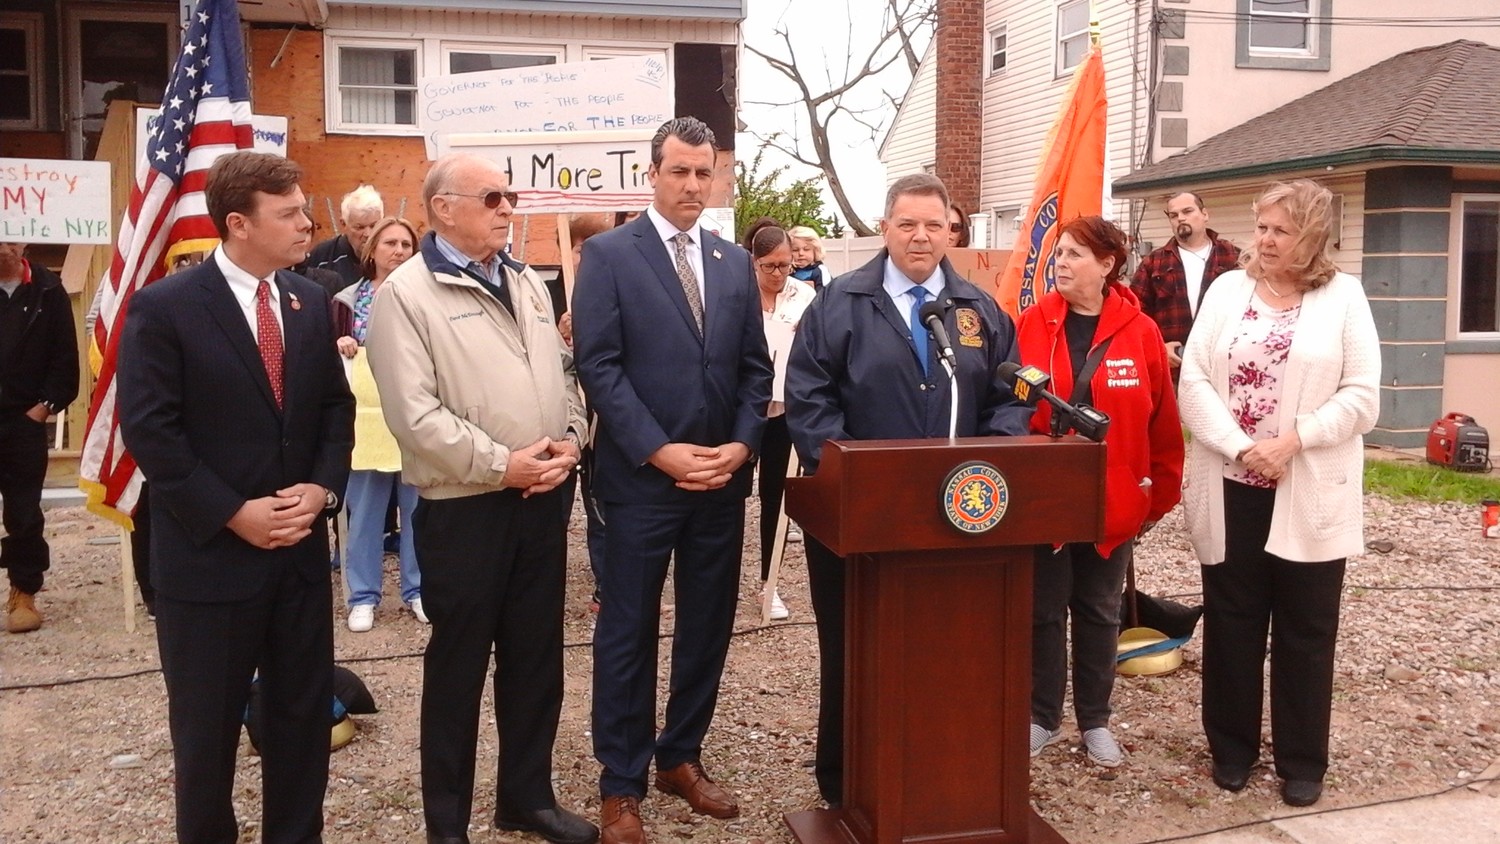 County legislators Steve Rhoads, at lectern, held a news conference last Friday to call on the state to extend its home elevation deadlines. It did so only hours after the gathering.